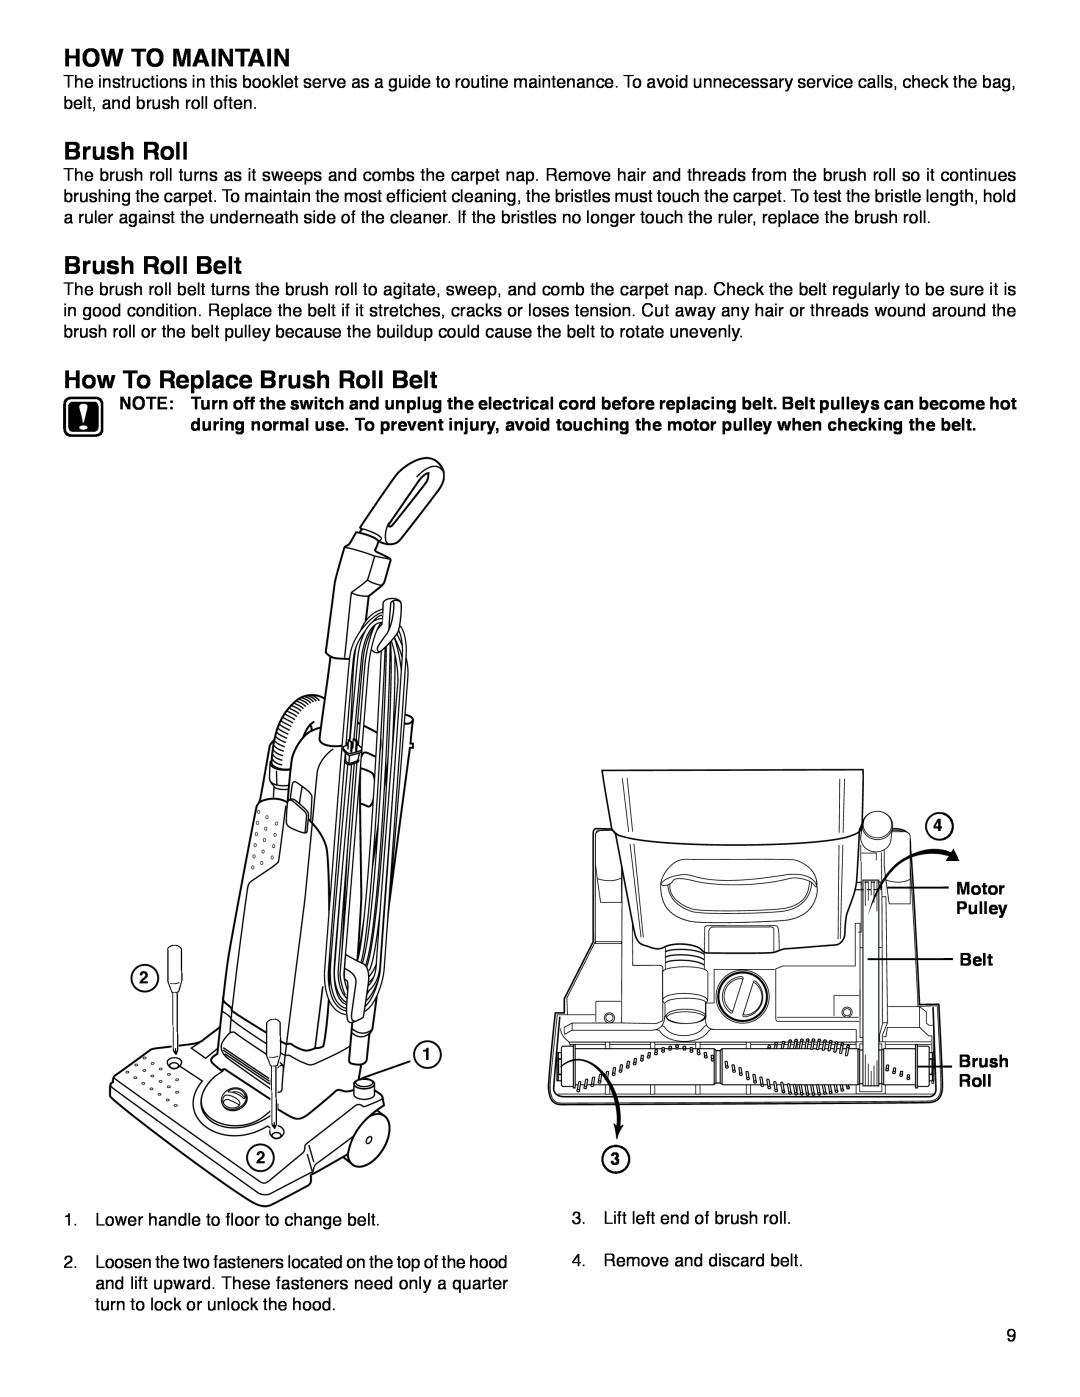 Eureka HD4570 warranty How To Maintain, How To Replace Brush Roll Belt, Motor, Pulley 